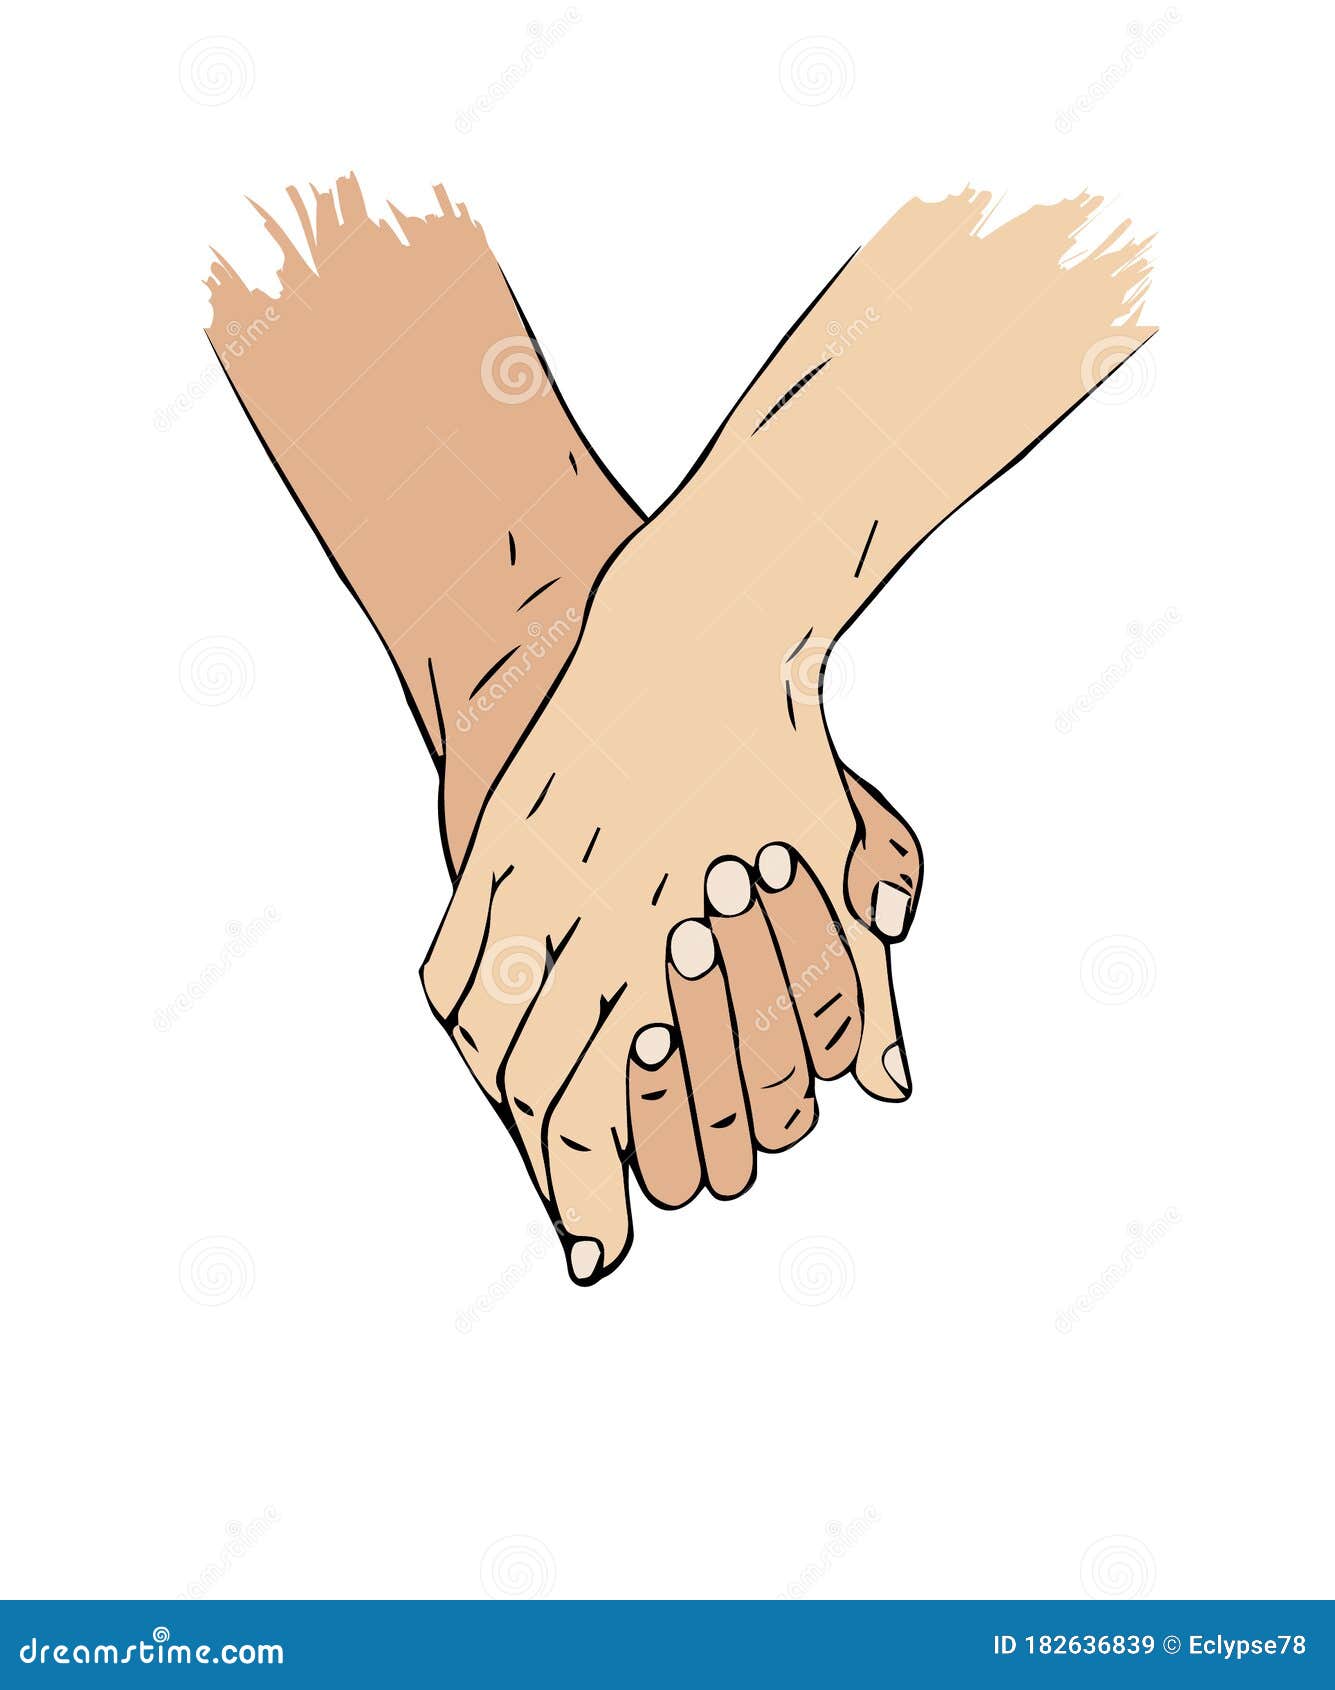 Drawing of A Couple Holding Hands by RyosukeDoesArt on DeviantArt